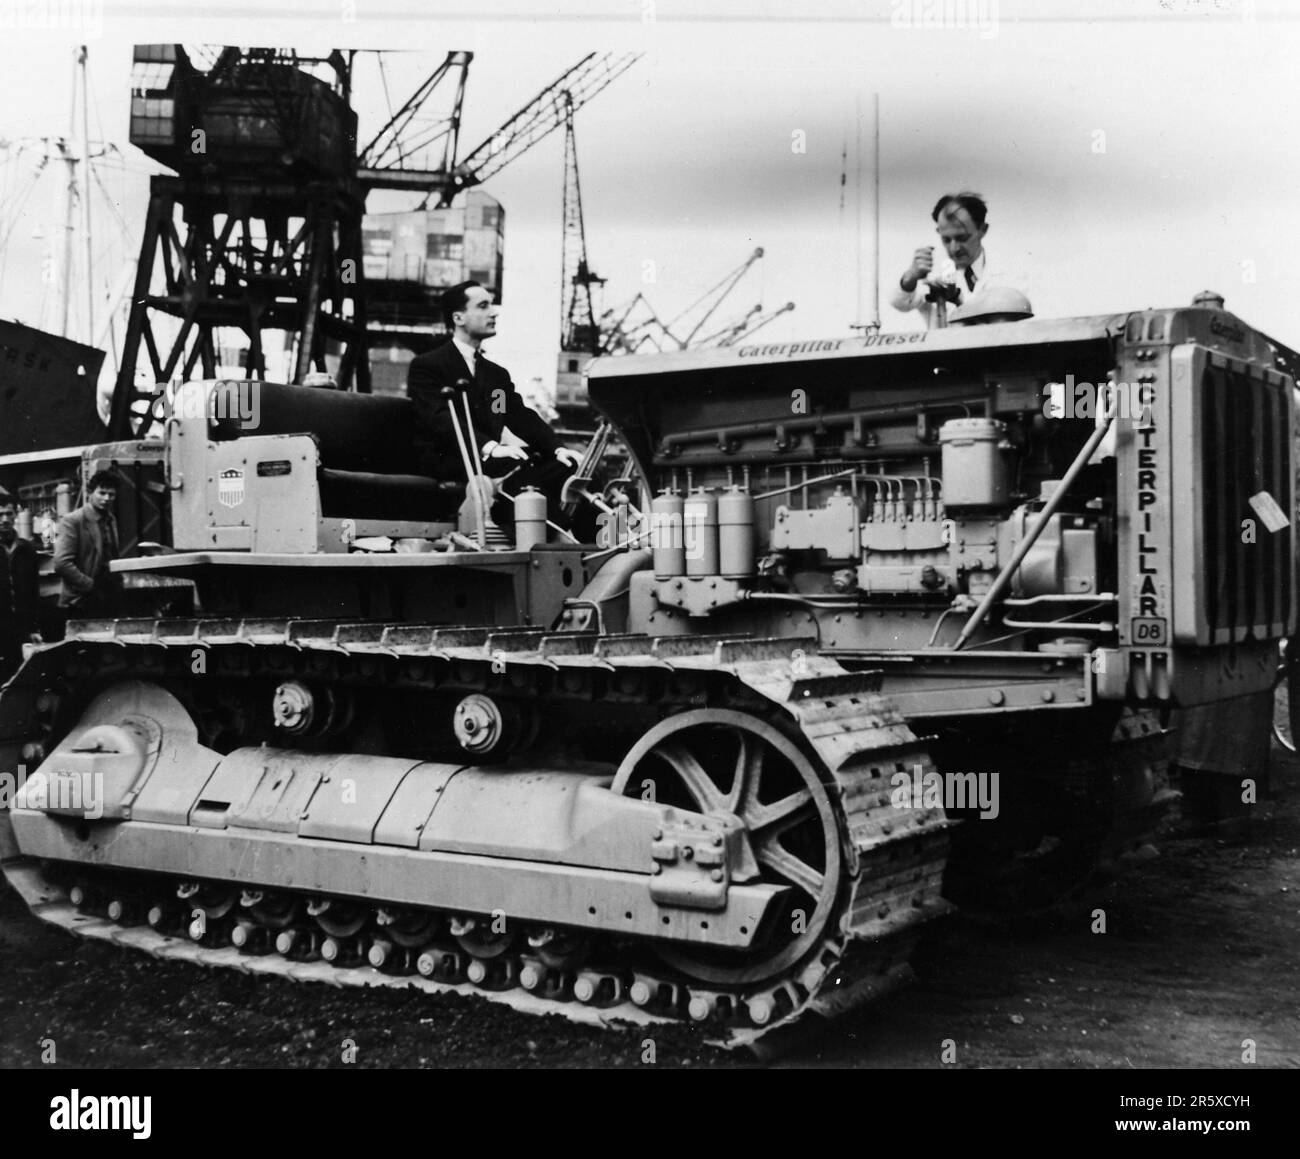 A bulldozer shipped from the US under the Marshall Plan arriving in France. The Marshall Plan was a very ambitious financial aid program proposed by US Secretary of State George Marshall. He understood that a destroyed and prostrate Europe had to have financial help if it were to recover and to remove the threat of communist insurgency. The aid was given not lent and each country decided on how it would use the funds. In the three years of the program the US gave Europe $13 billion, a colossal sum worth $175 billion at todays values. This far-seeing and generous plan was a major factor in rest Stock Photo